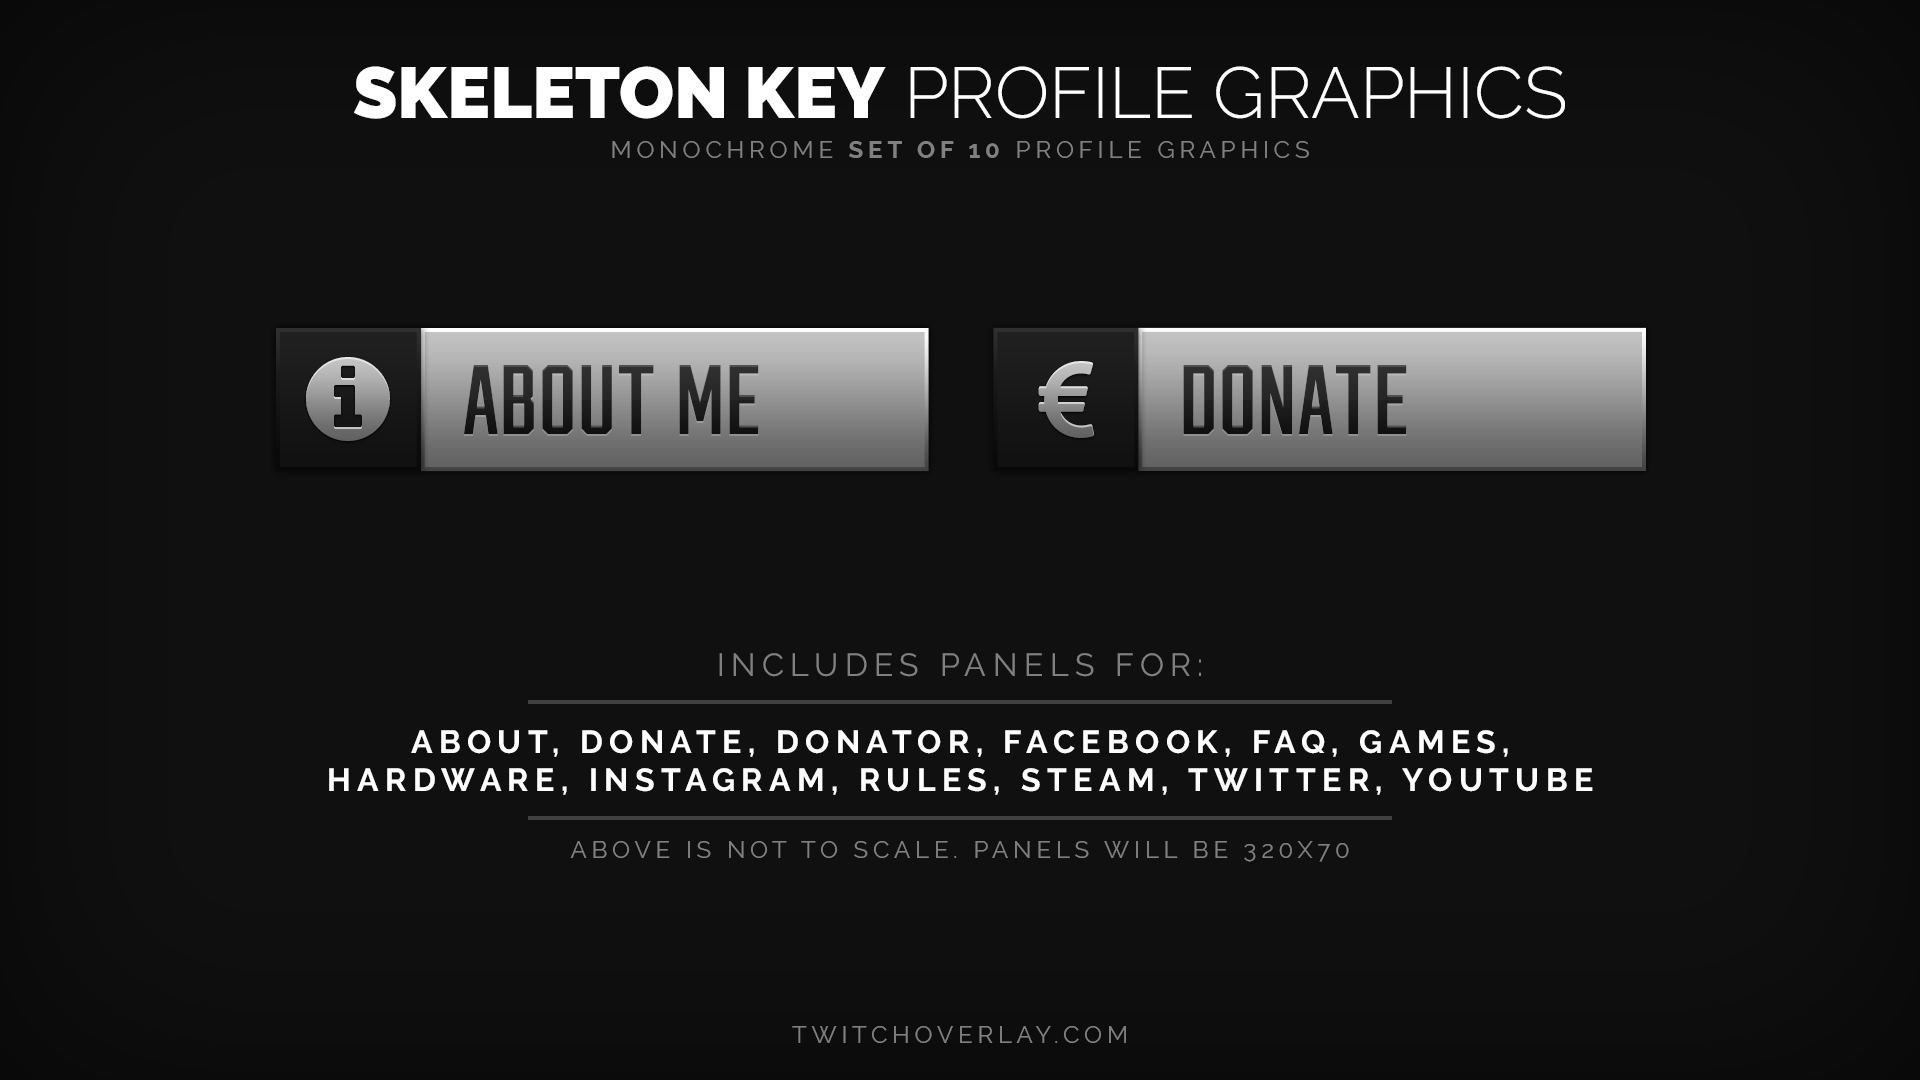 professional profile graphics - Twitch Overlay